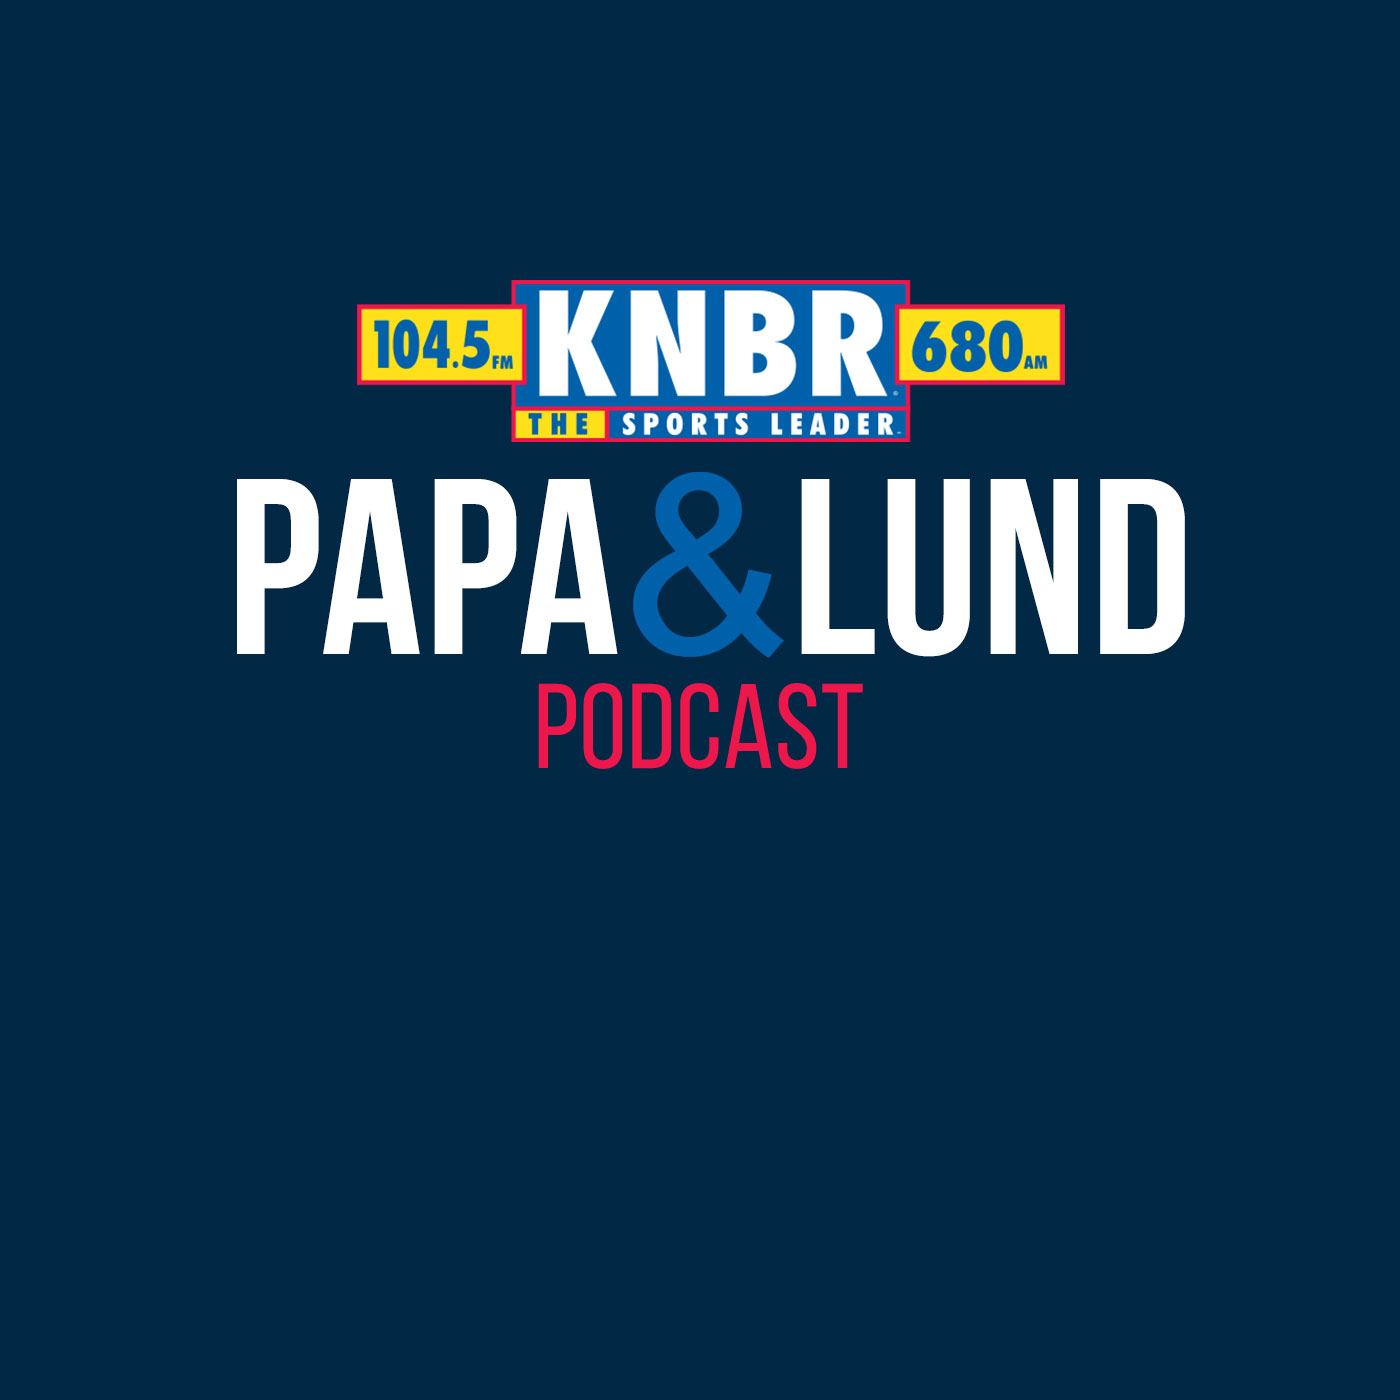 10-6 Brad Sham previews 49ers vs Cowboys with Papa & Lund and breaks down what Randy Gregory will bring to the 49ers